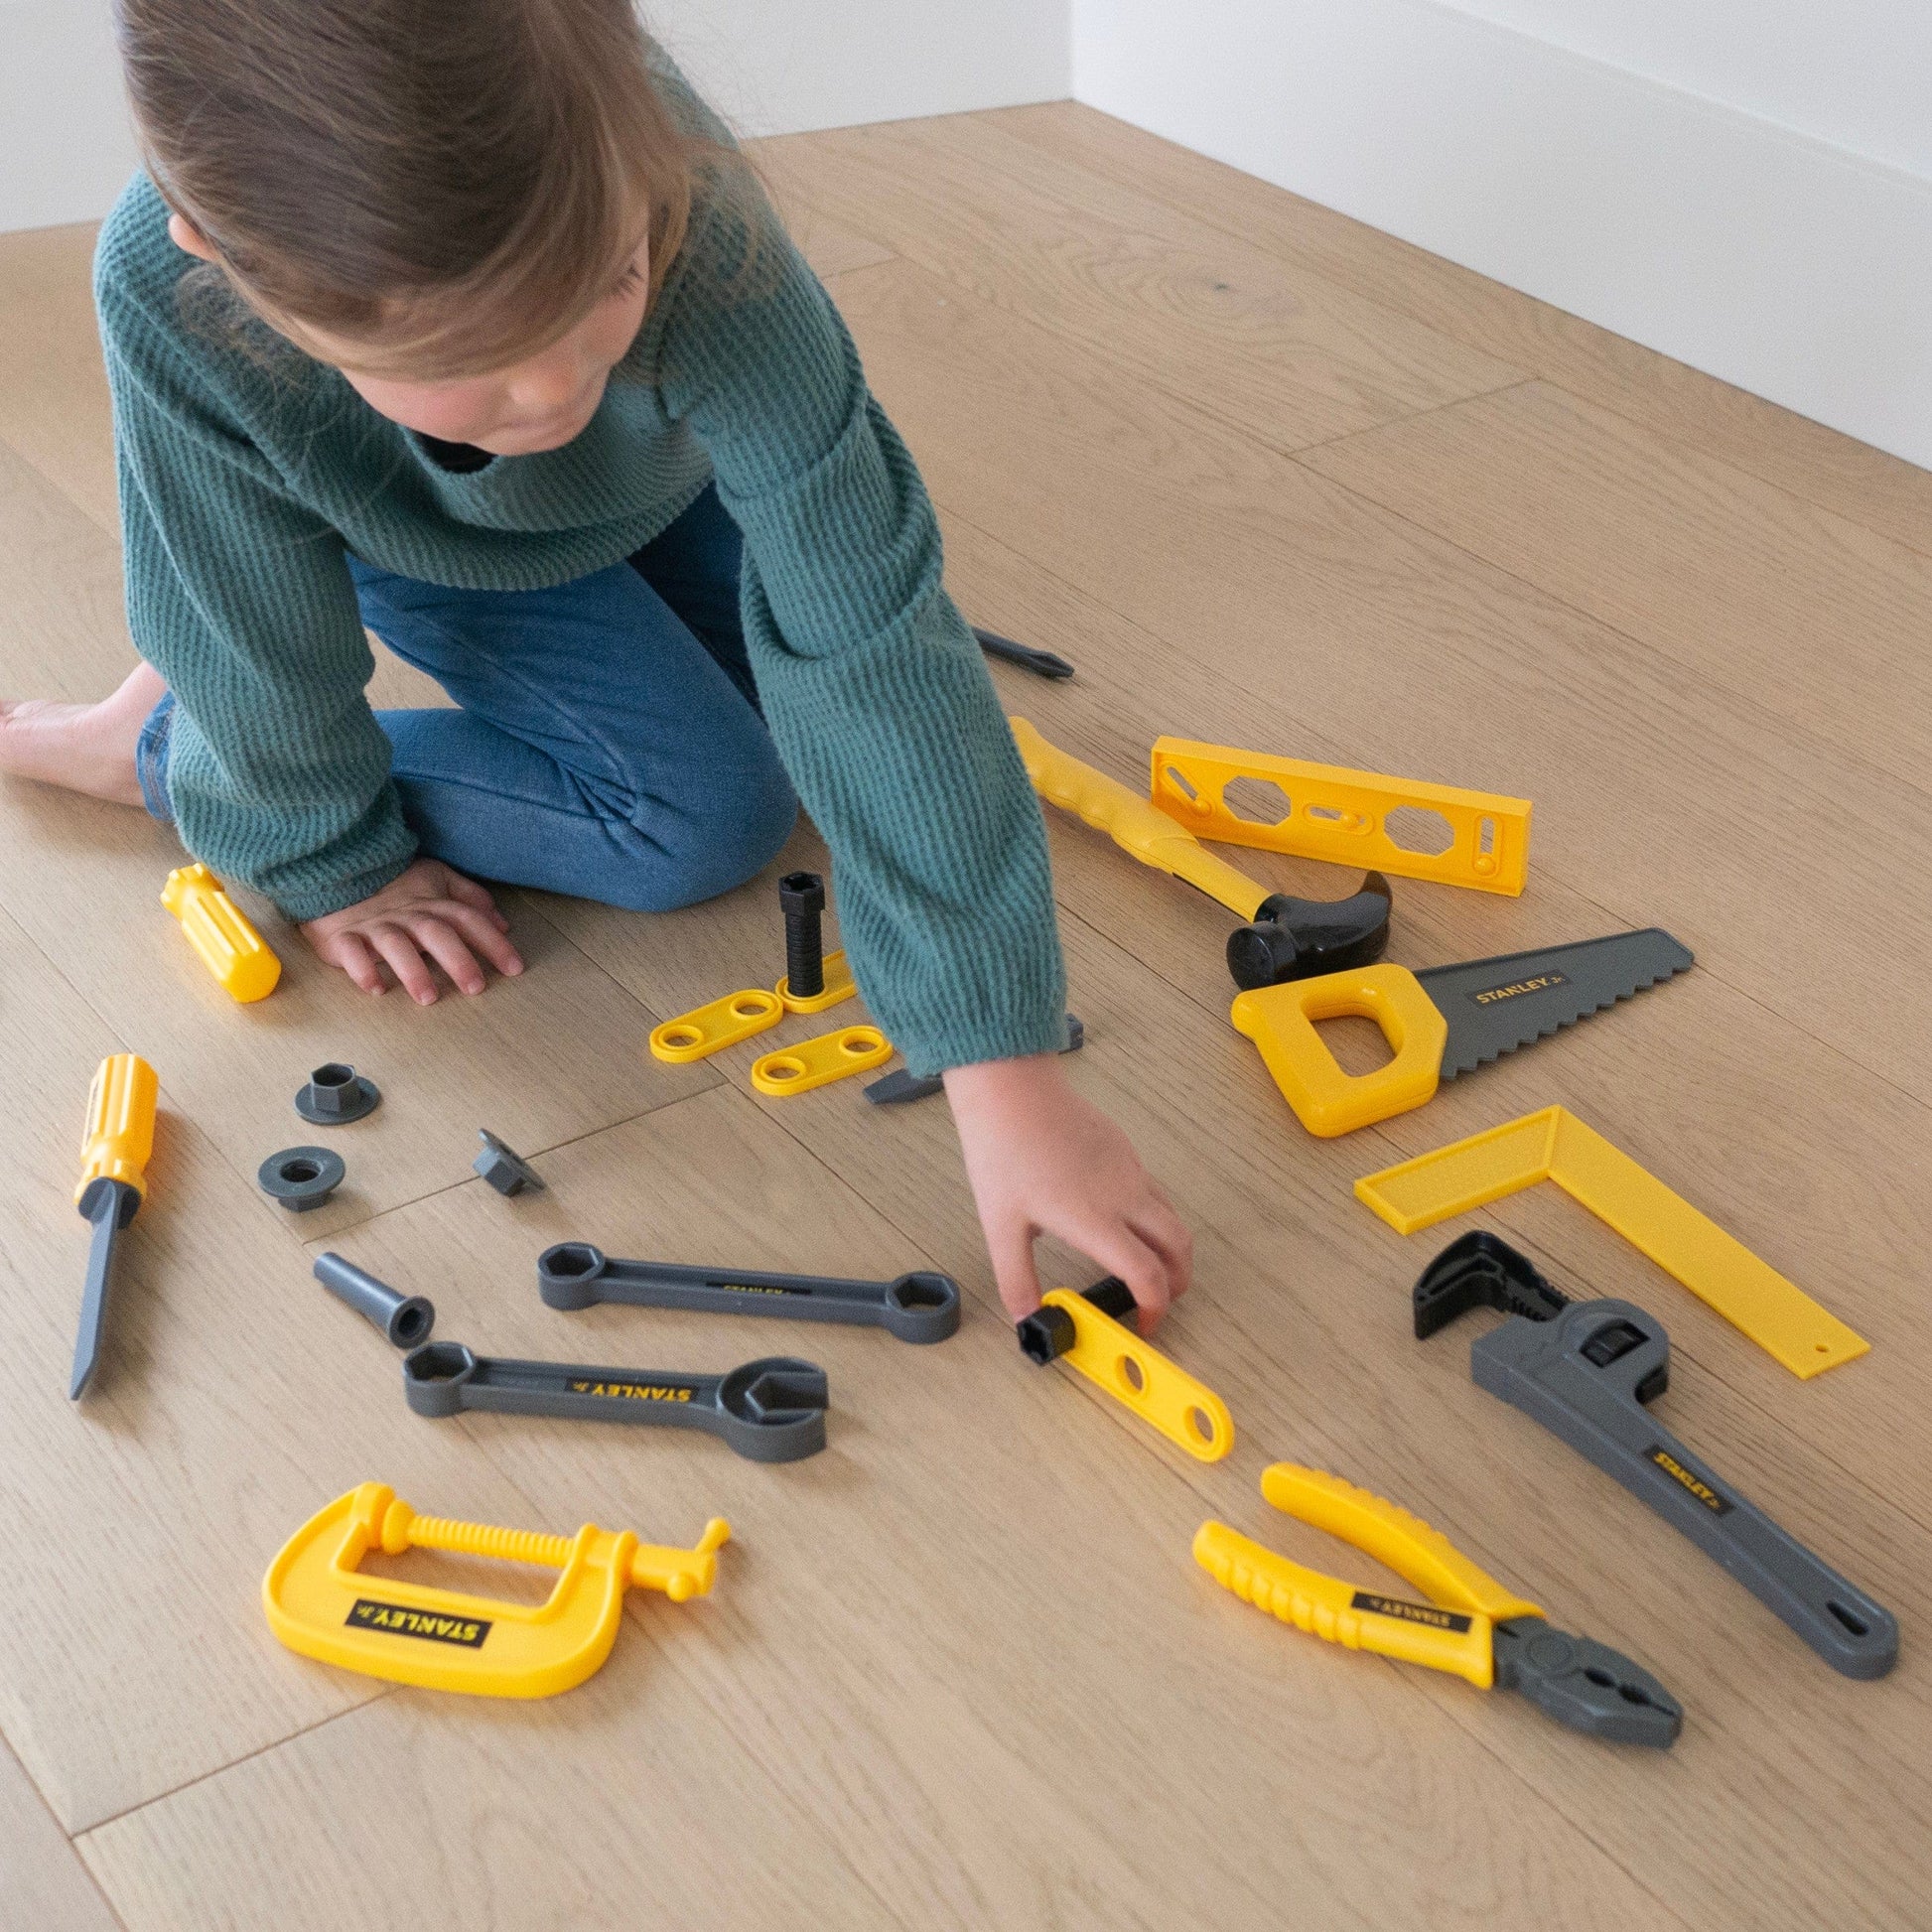 Kids Pretend Play Tool Sets - Stanley Jr Toys - Mommy's Fabulous Finds